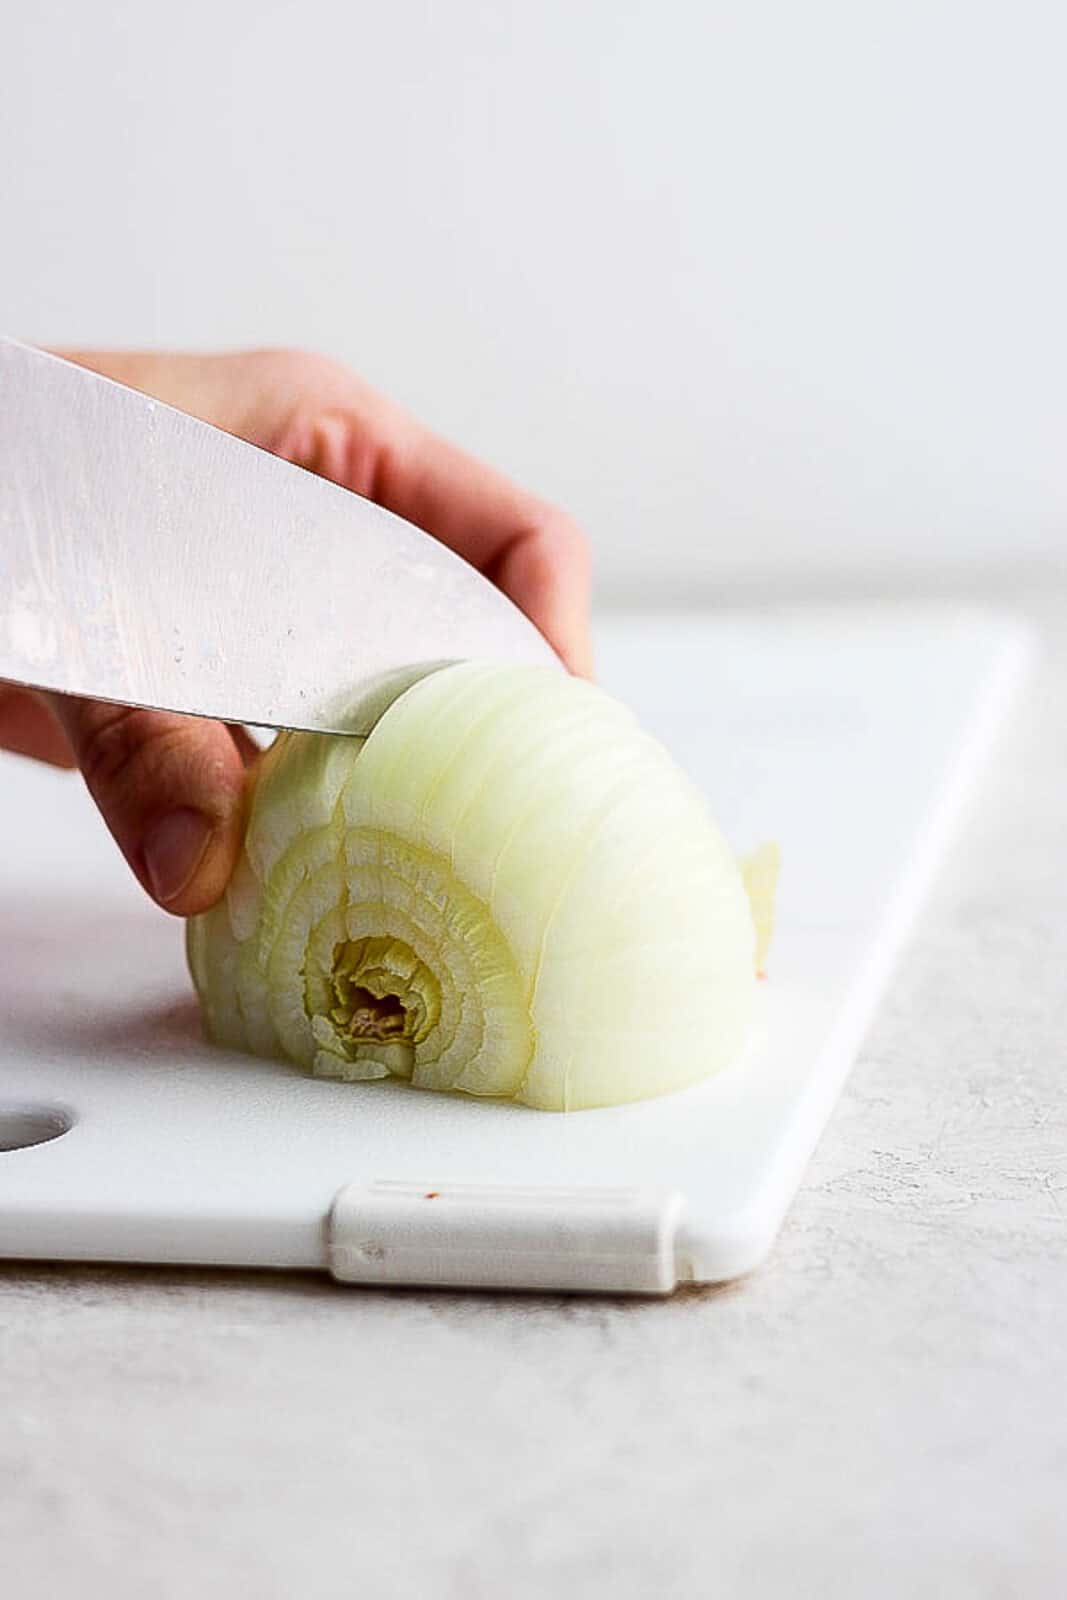 A knife slicing a yellow onion on a cutting board.